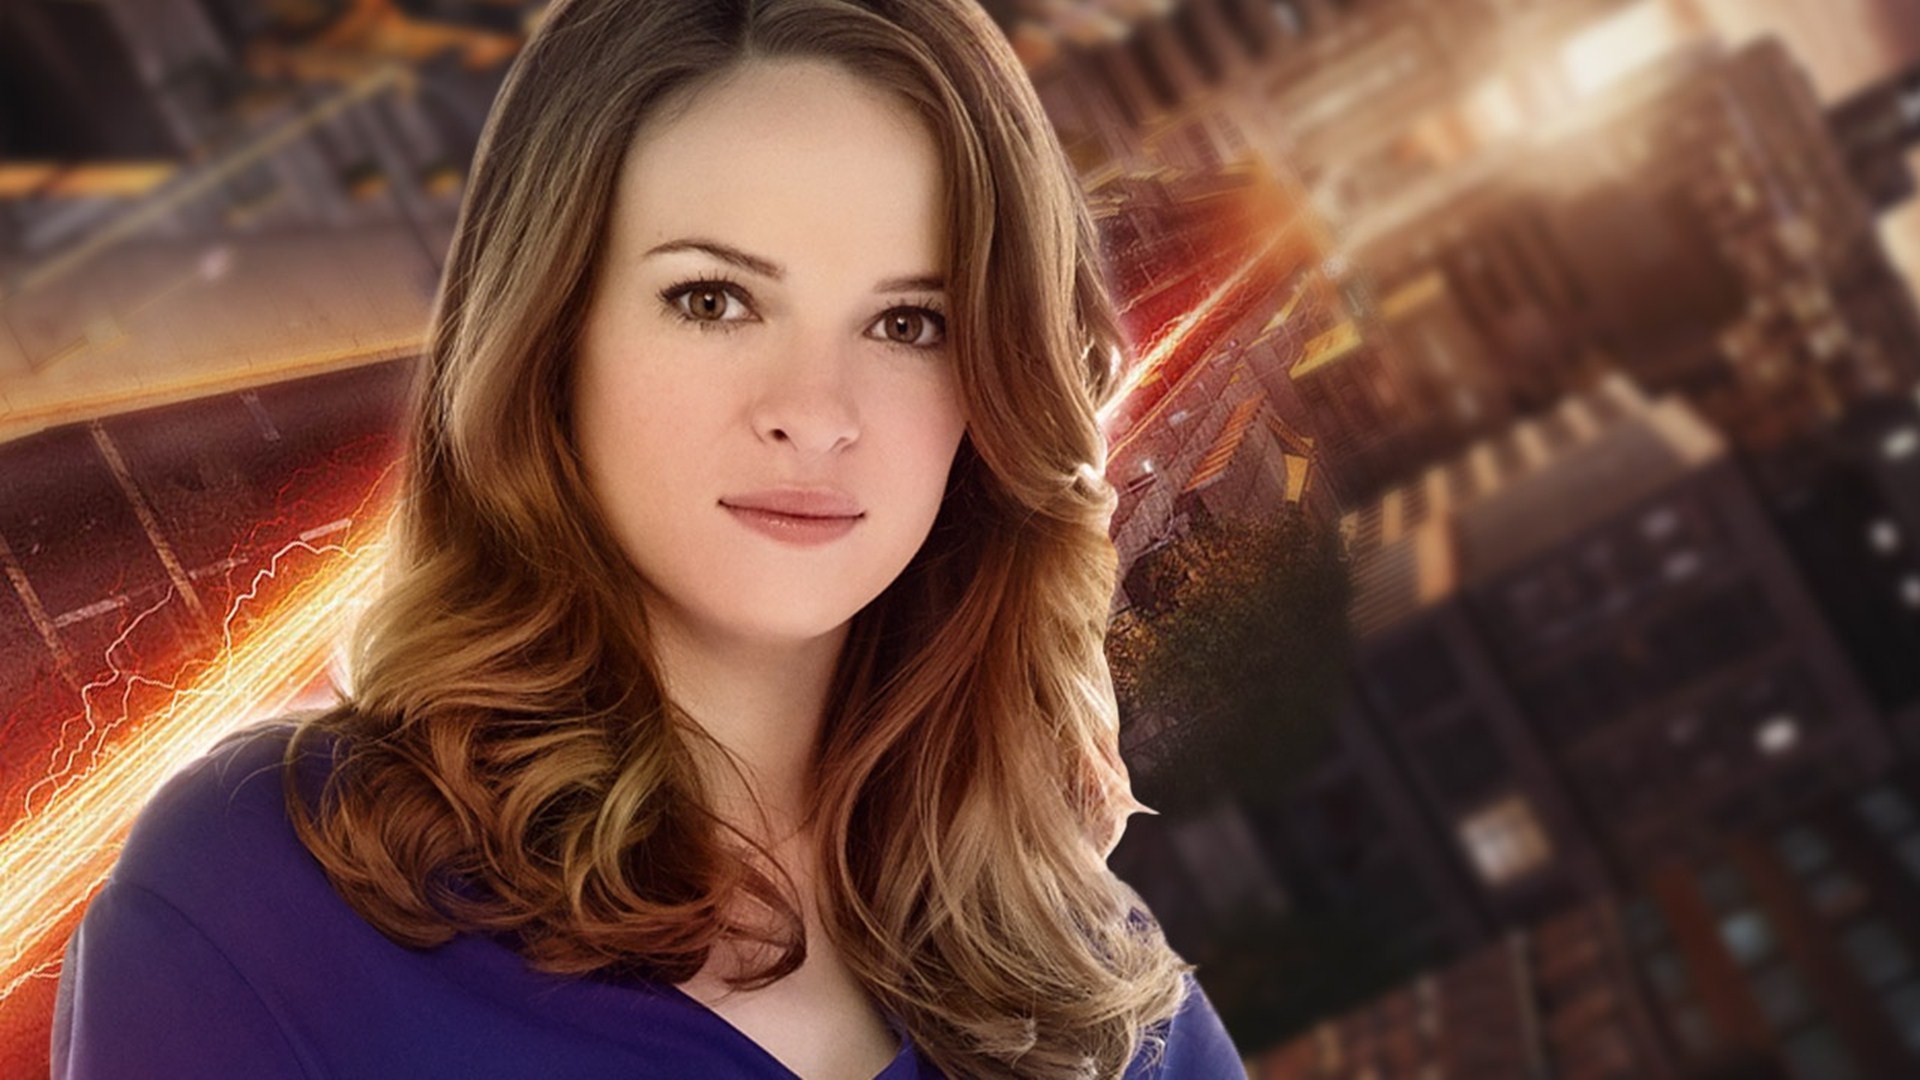 Danielle Panabaker Wallpaper Image Photos Pictures